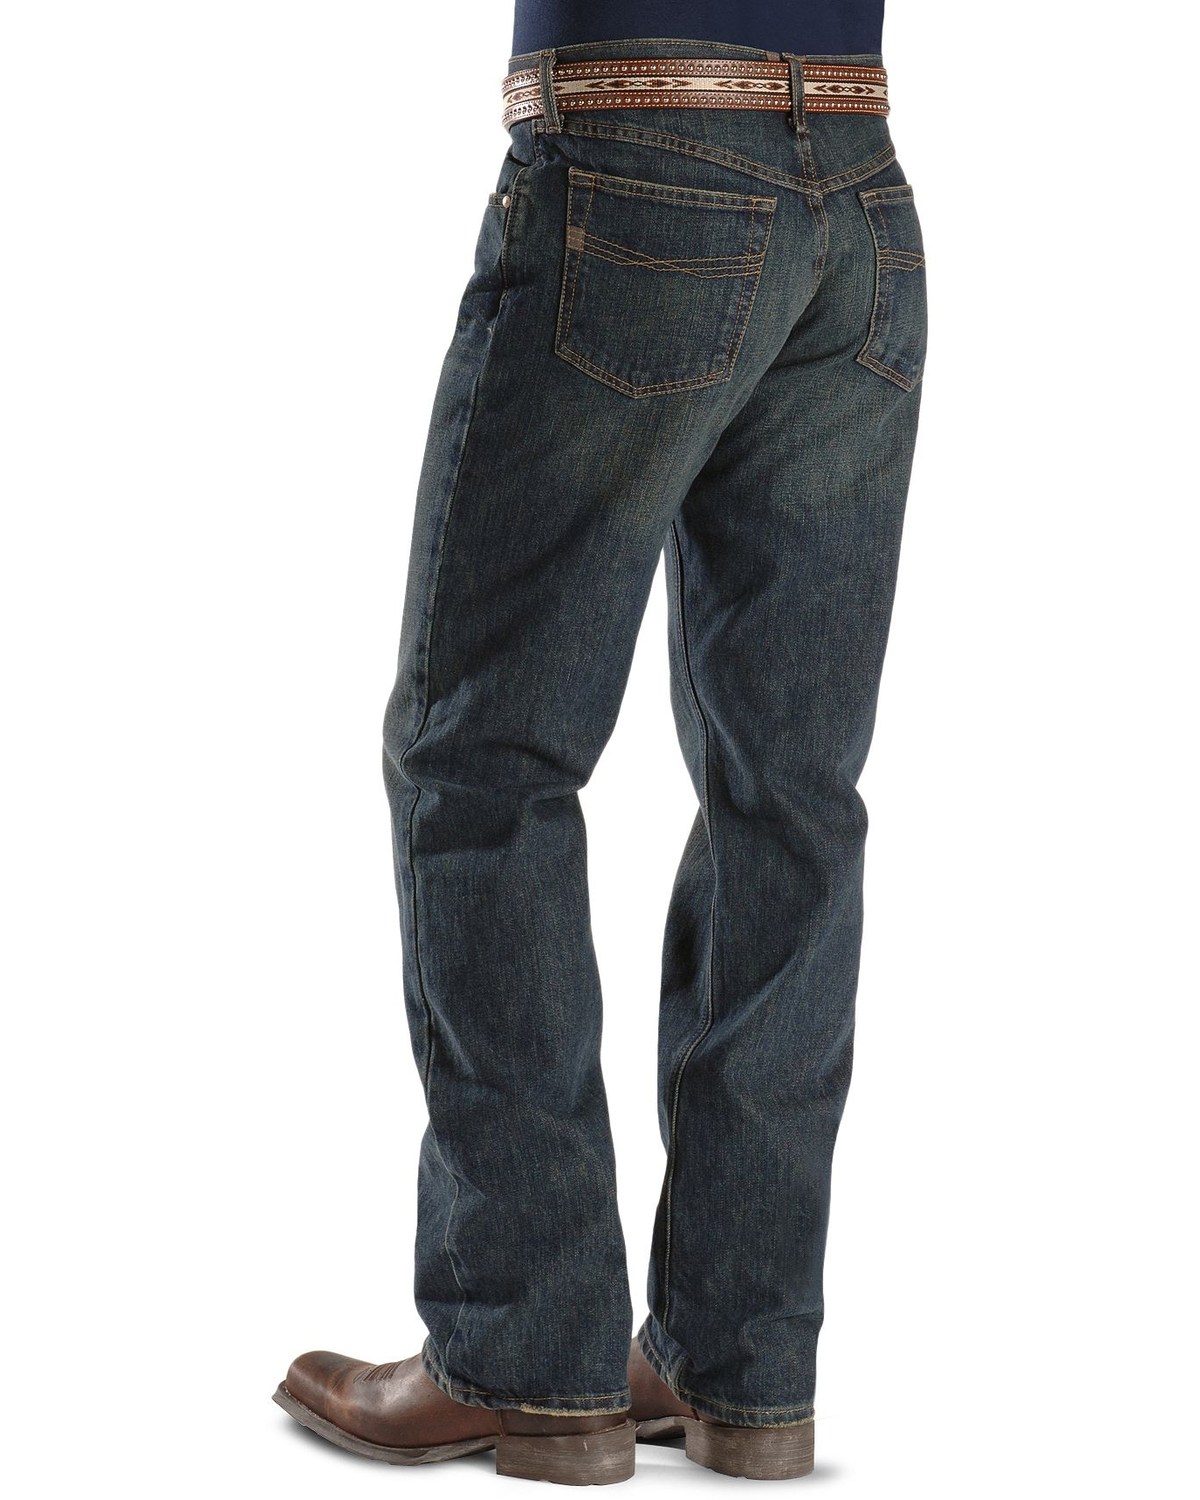 Ariat Men's M2 Swagger Relaxed Fit Jeans